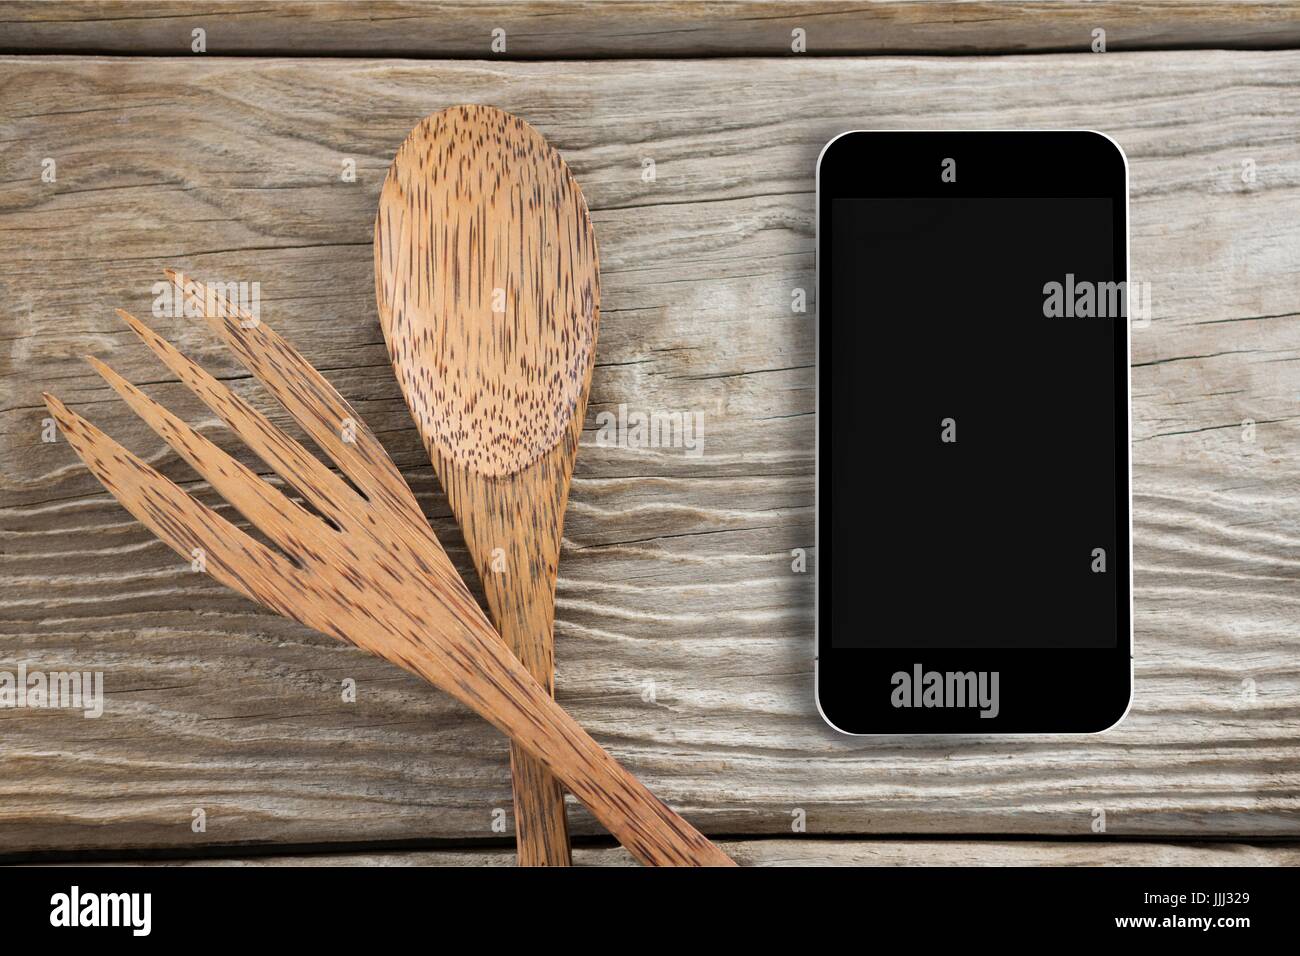 Phone on wooden desk and copy space on mobile phone Stock Photo